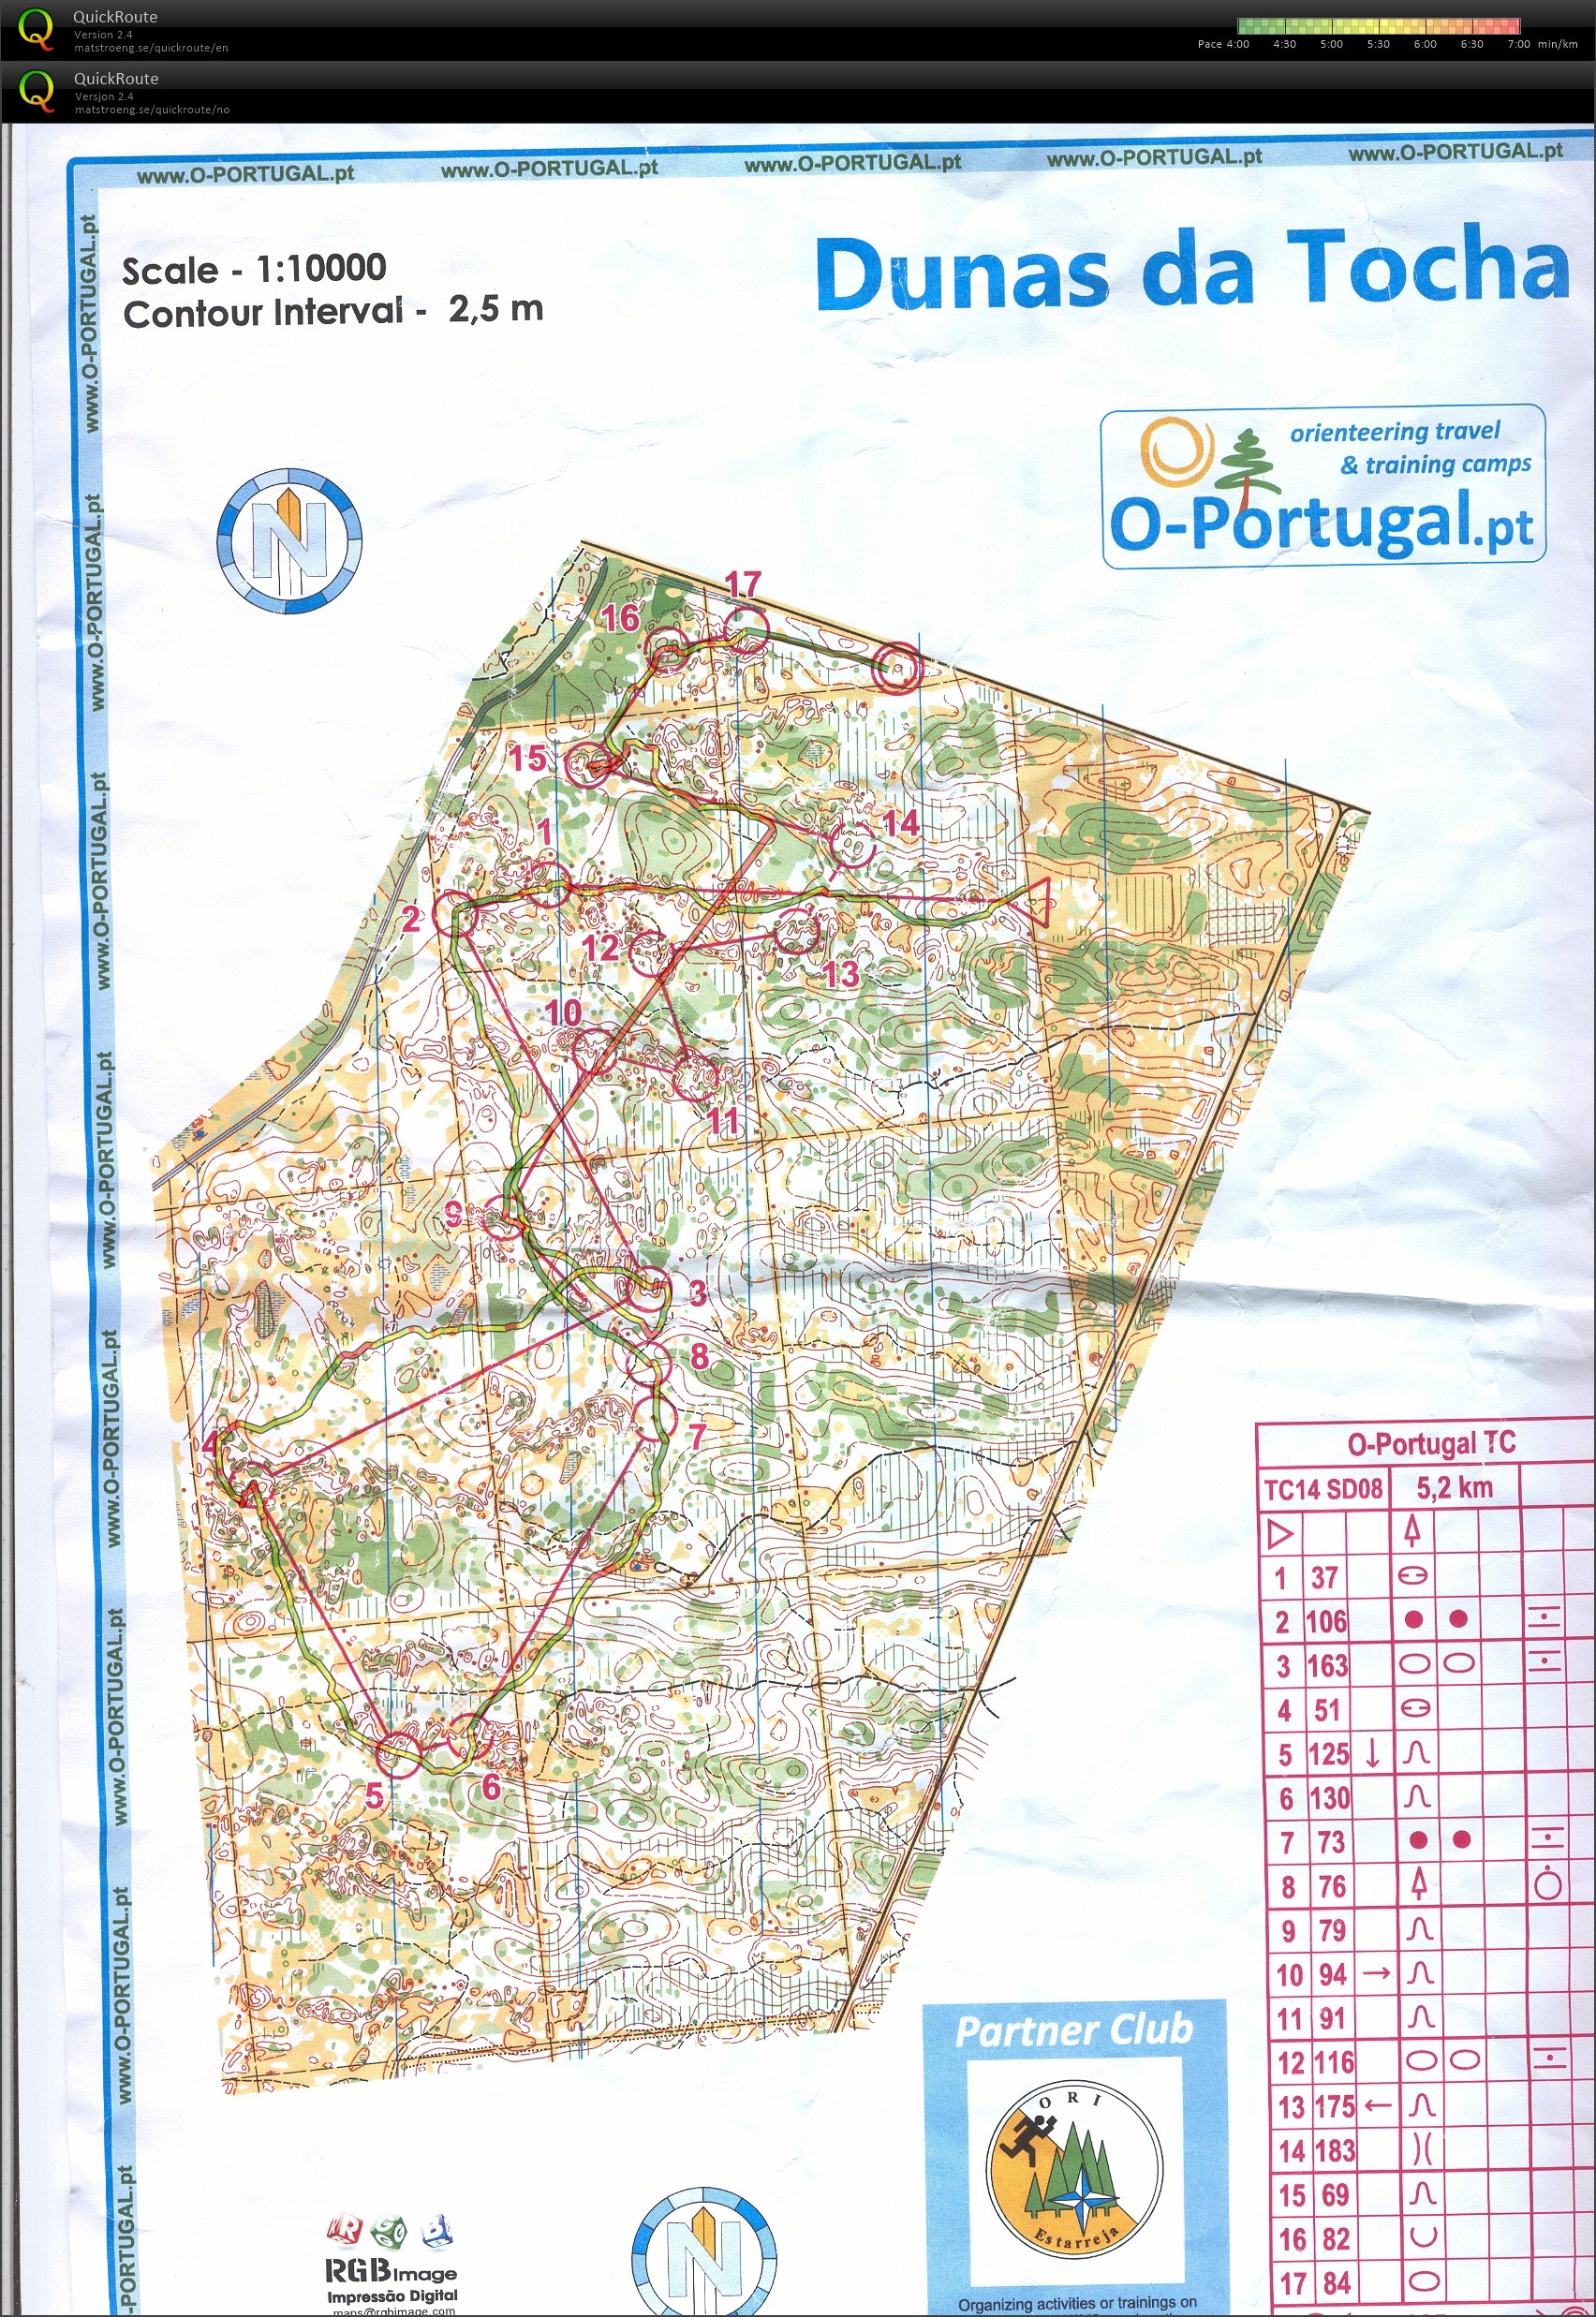 Portugal pass 7 (19-02-2014)